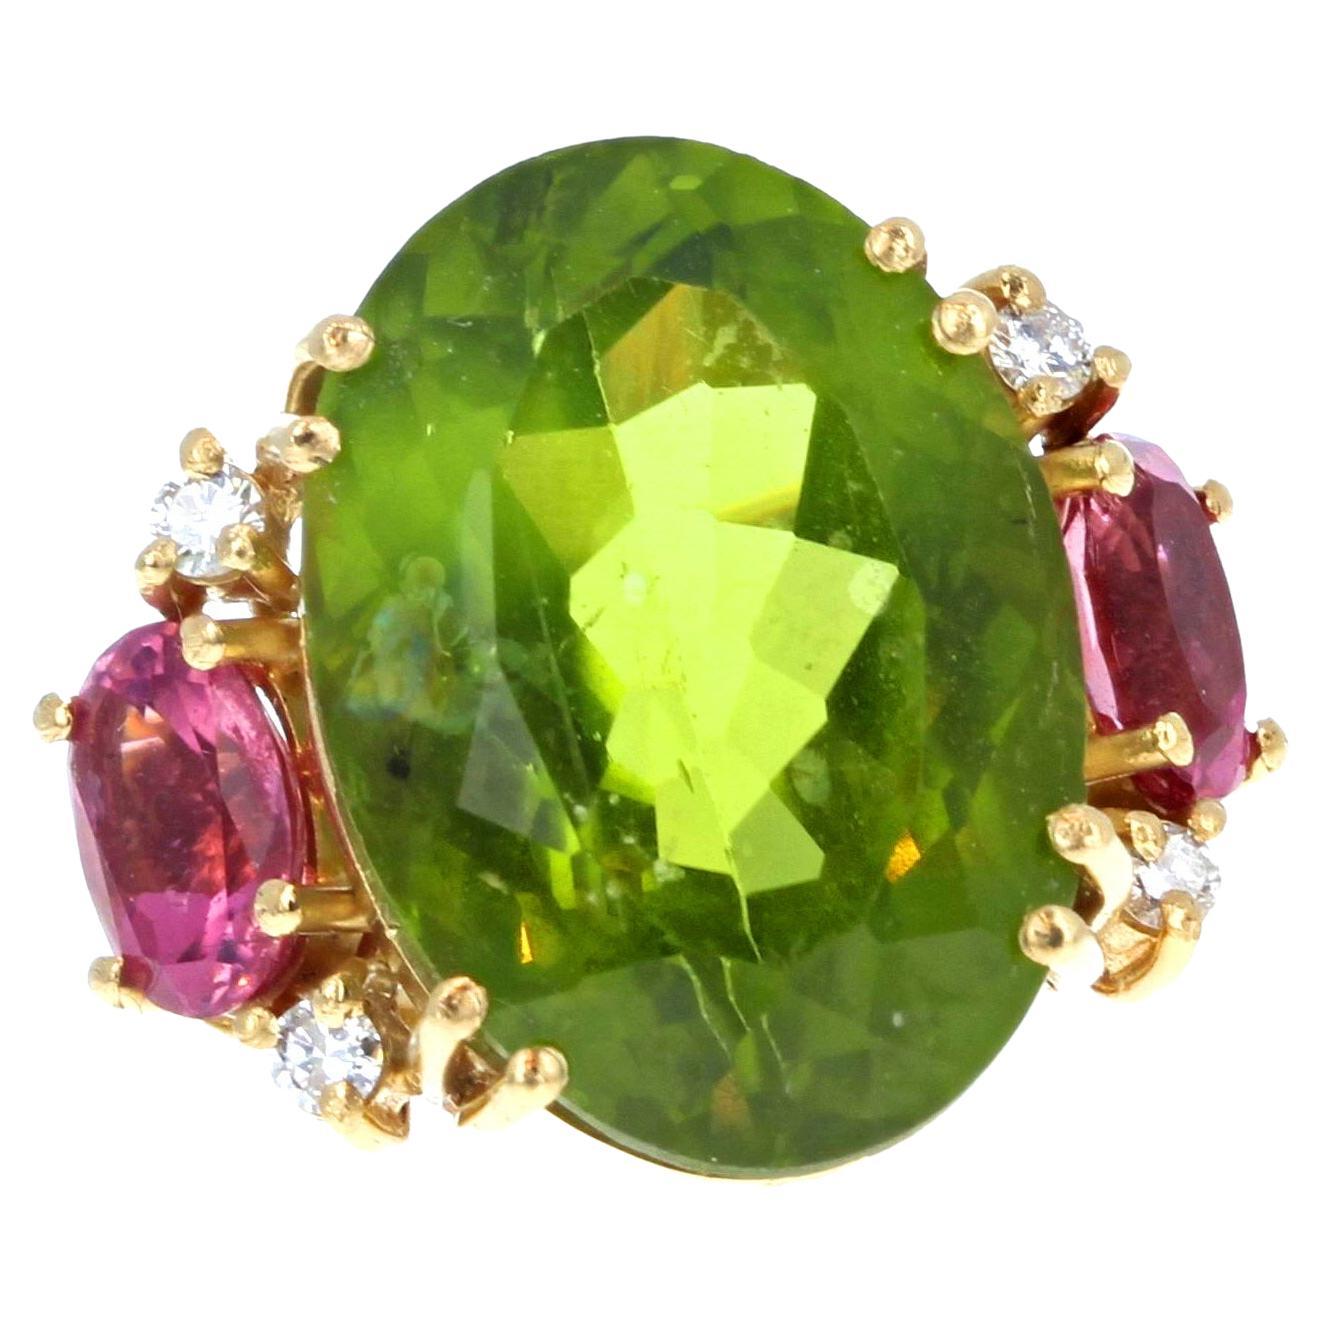 AJD Magnificent Brilliant 14 Ct Green&Pink Tourmalines, Diamonds 18Kt Gold Ring For Sale